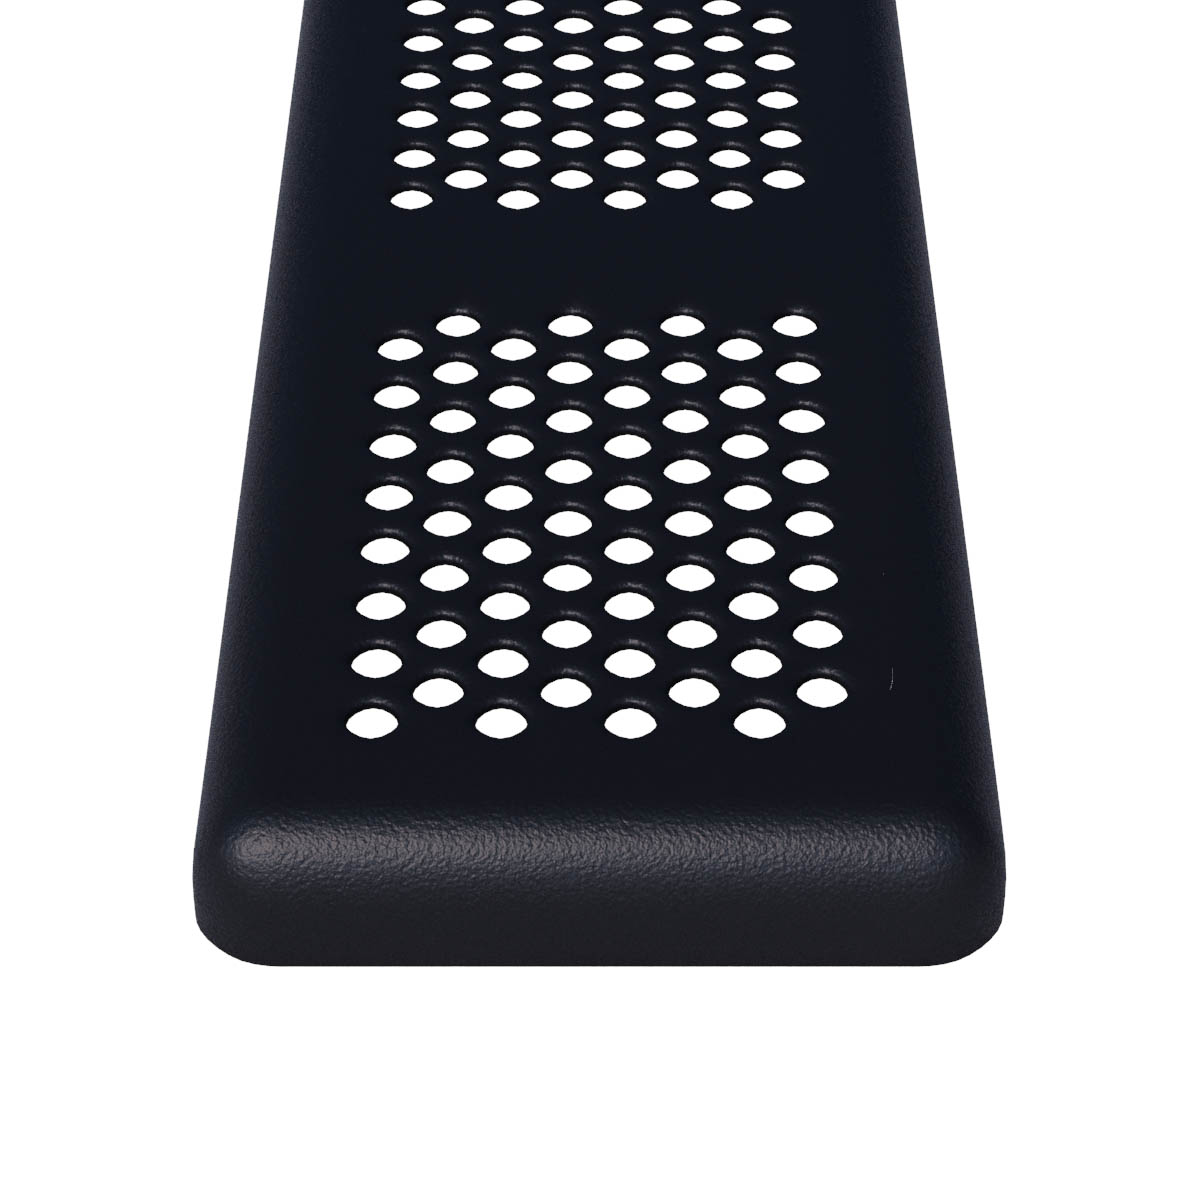 Perforated Steel Thermoplastic Picnic Table